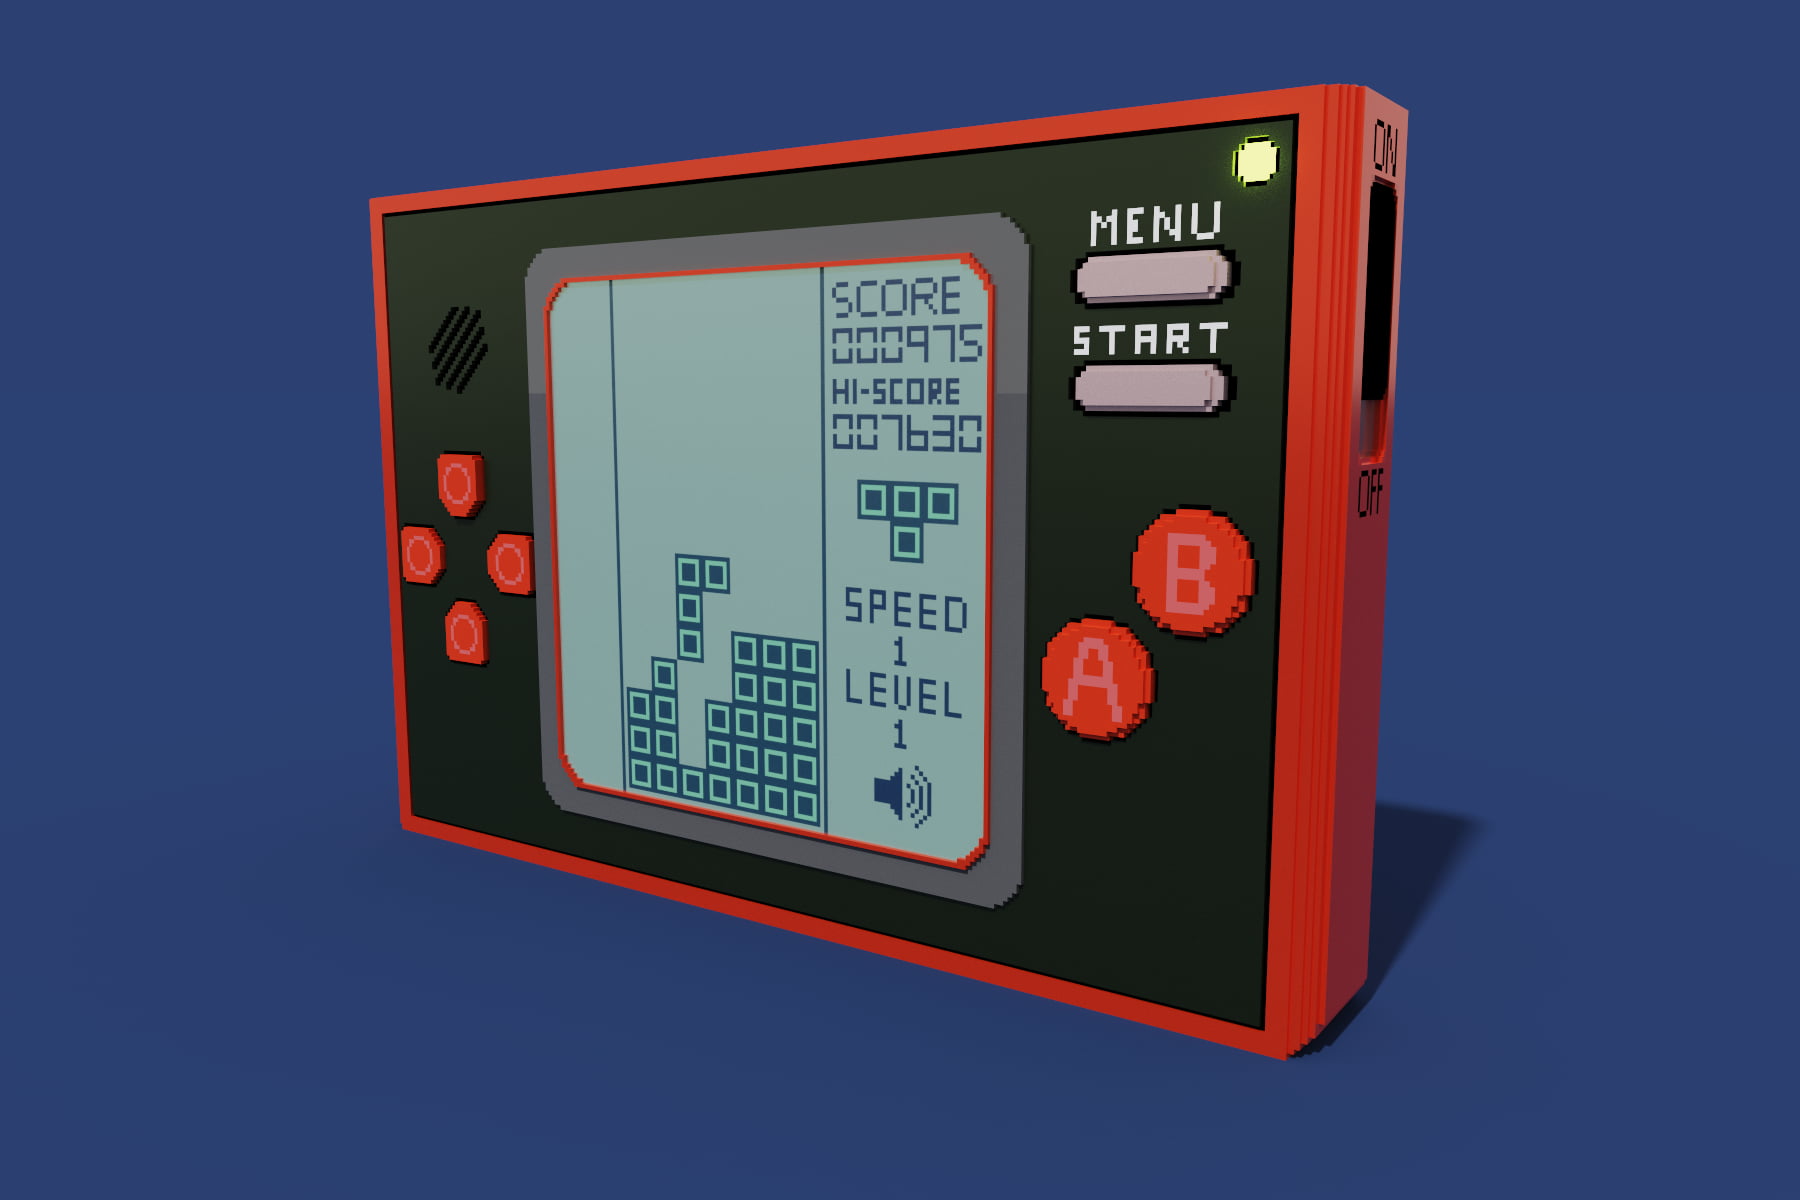 game and watch, Tetris, consoles, video games, MagicaVoxel